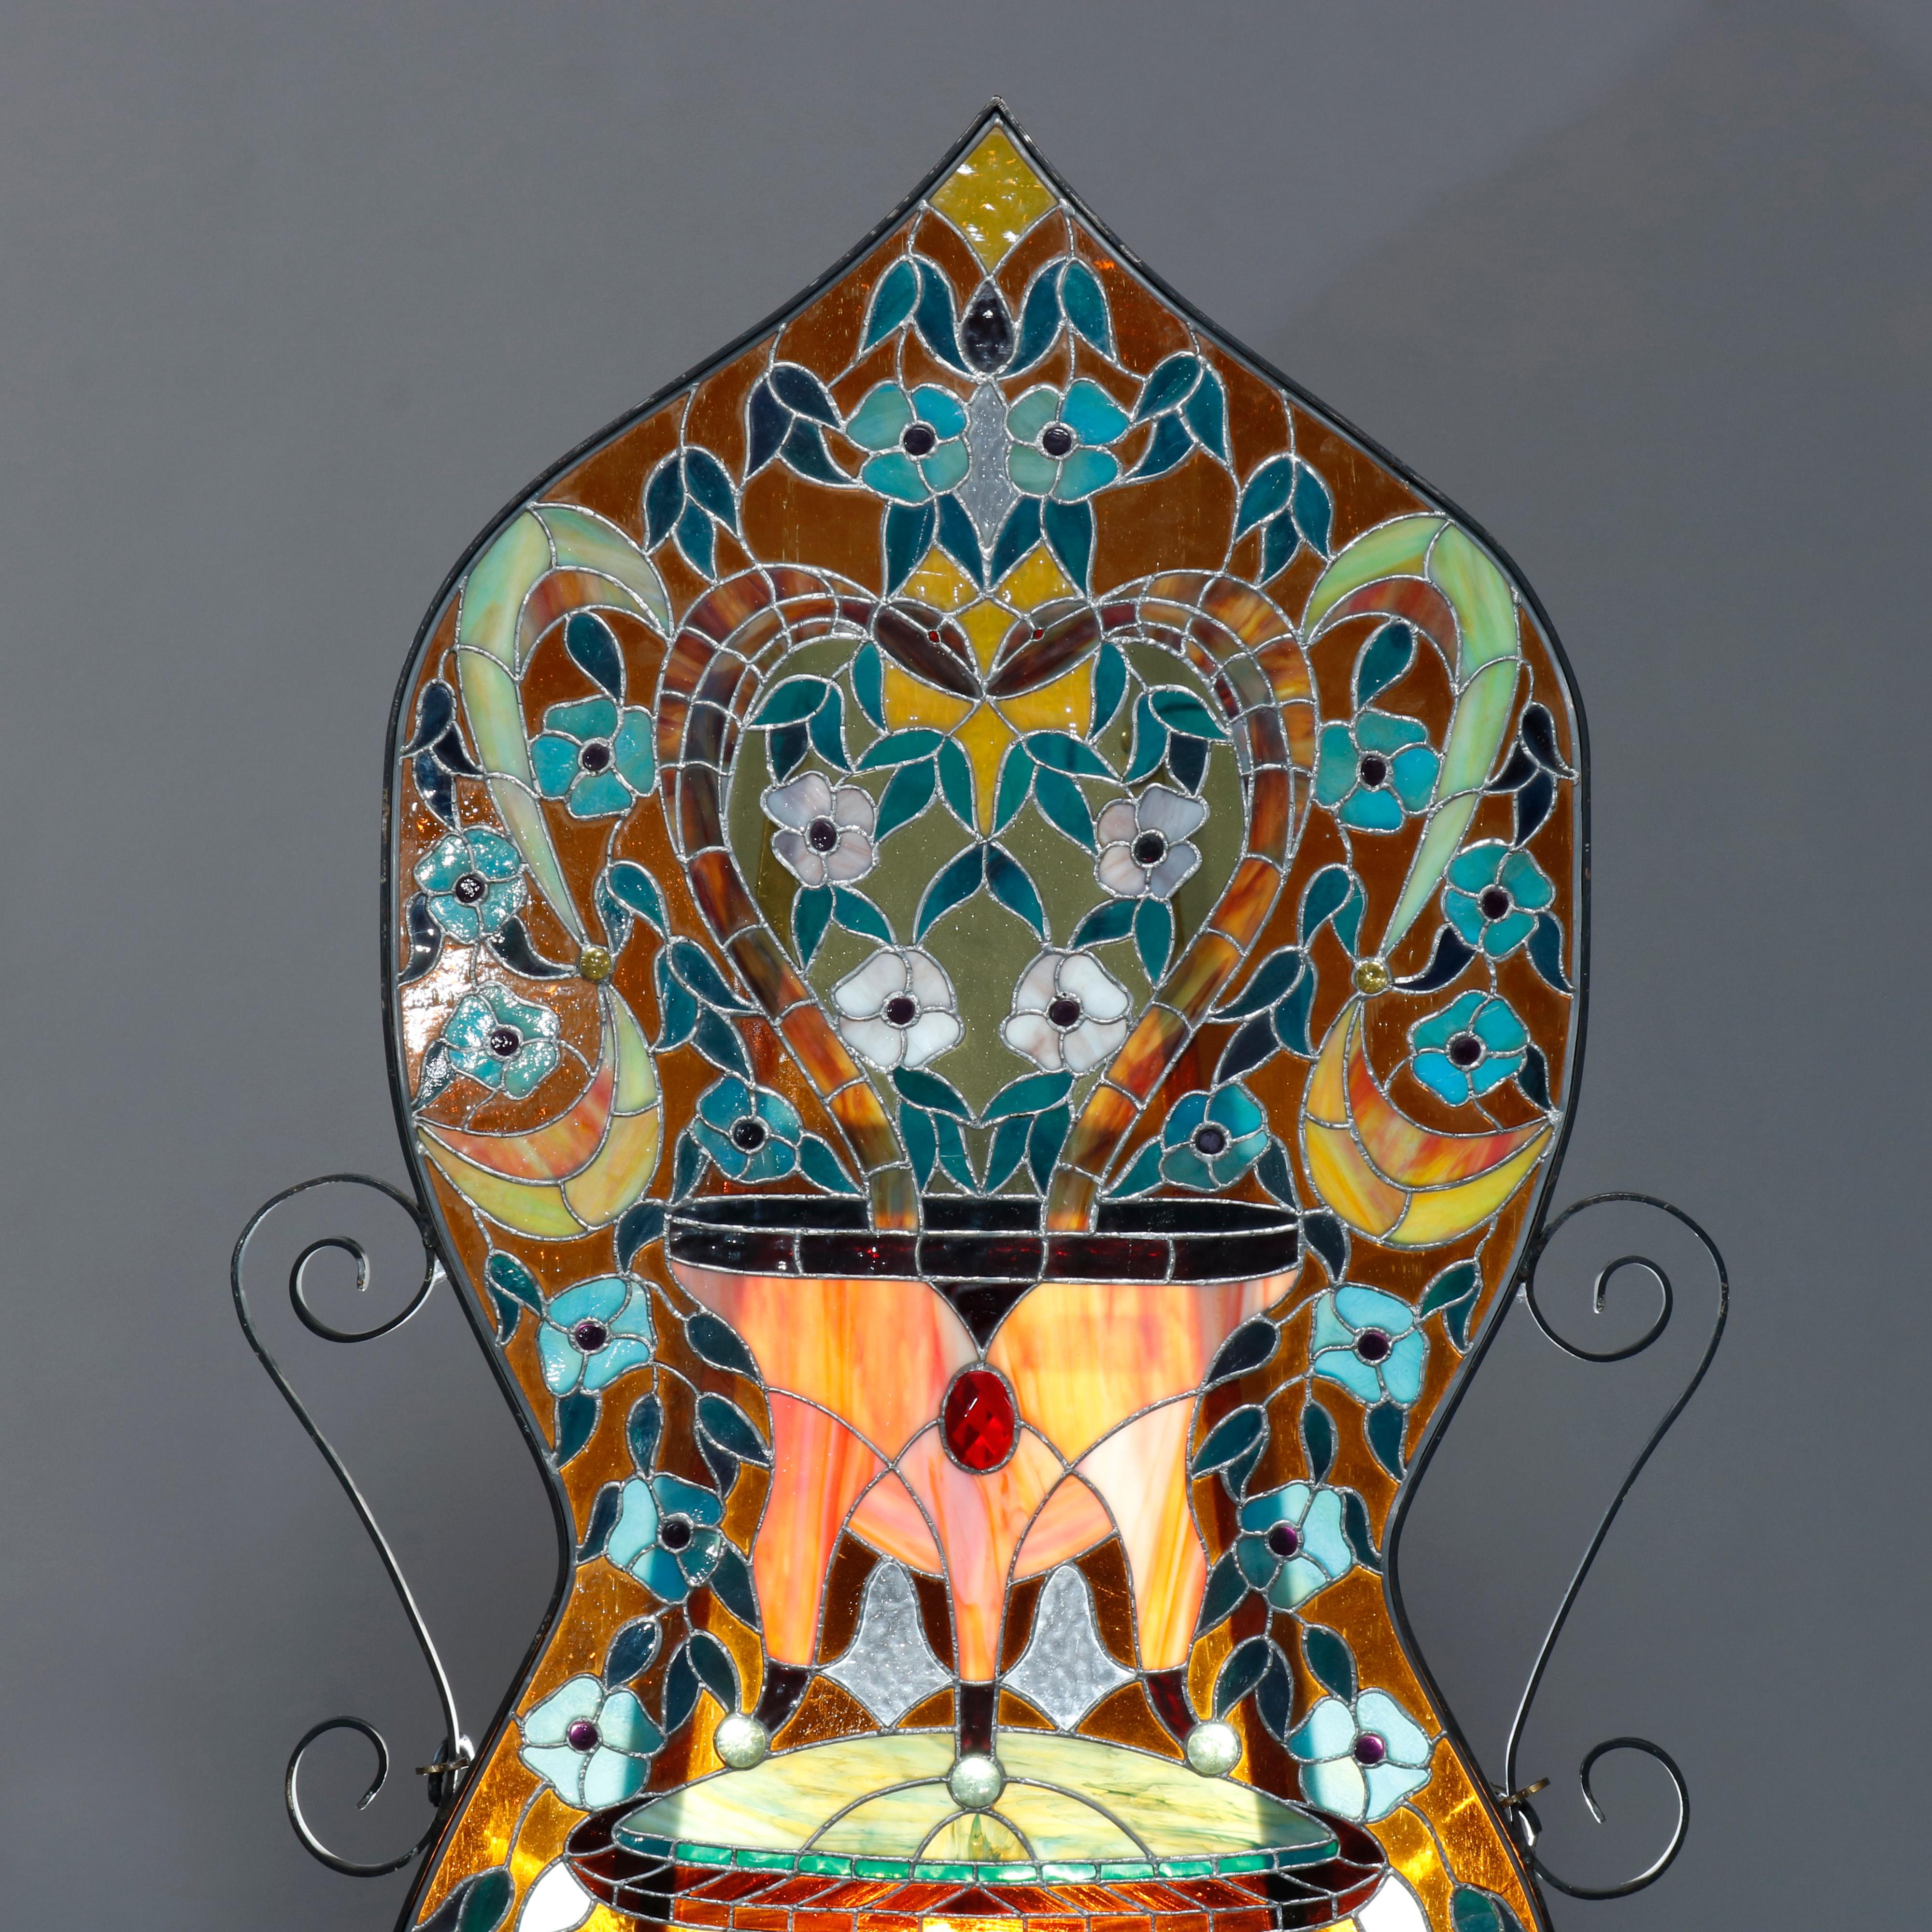 An antique Arts & Crafts style garden window offers leaded and jeweled glass with parlor table having floral urn, shaped panel with flanking scroll elements, 20th century.

Measures: 48.25